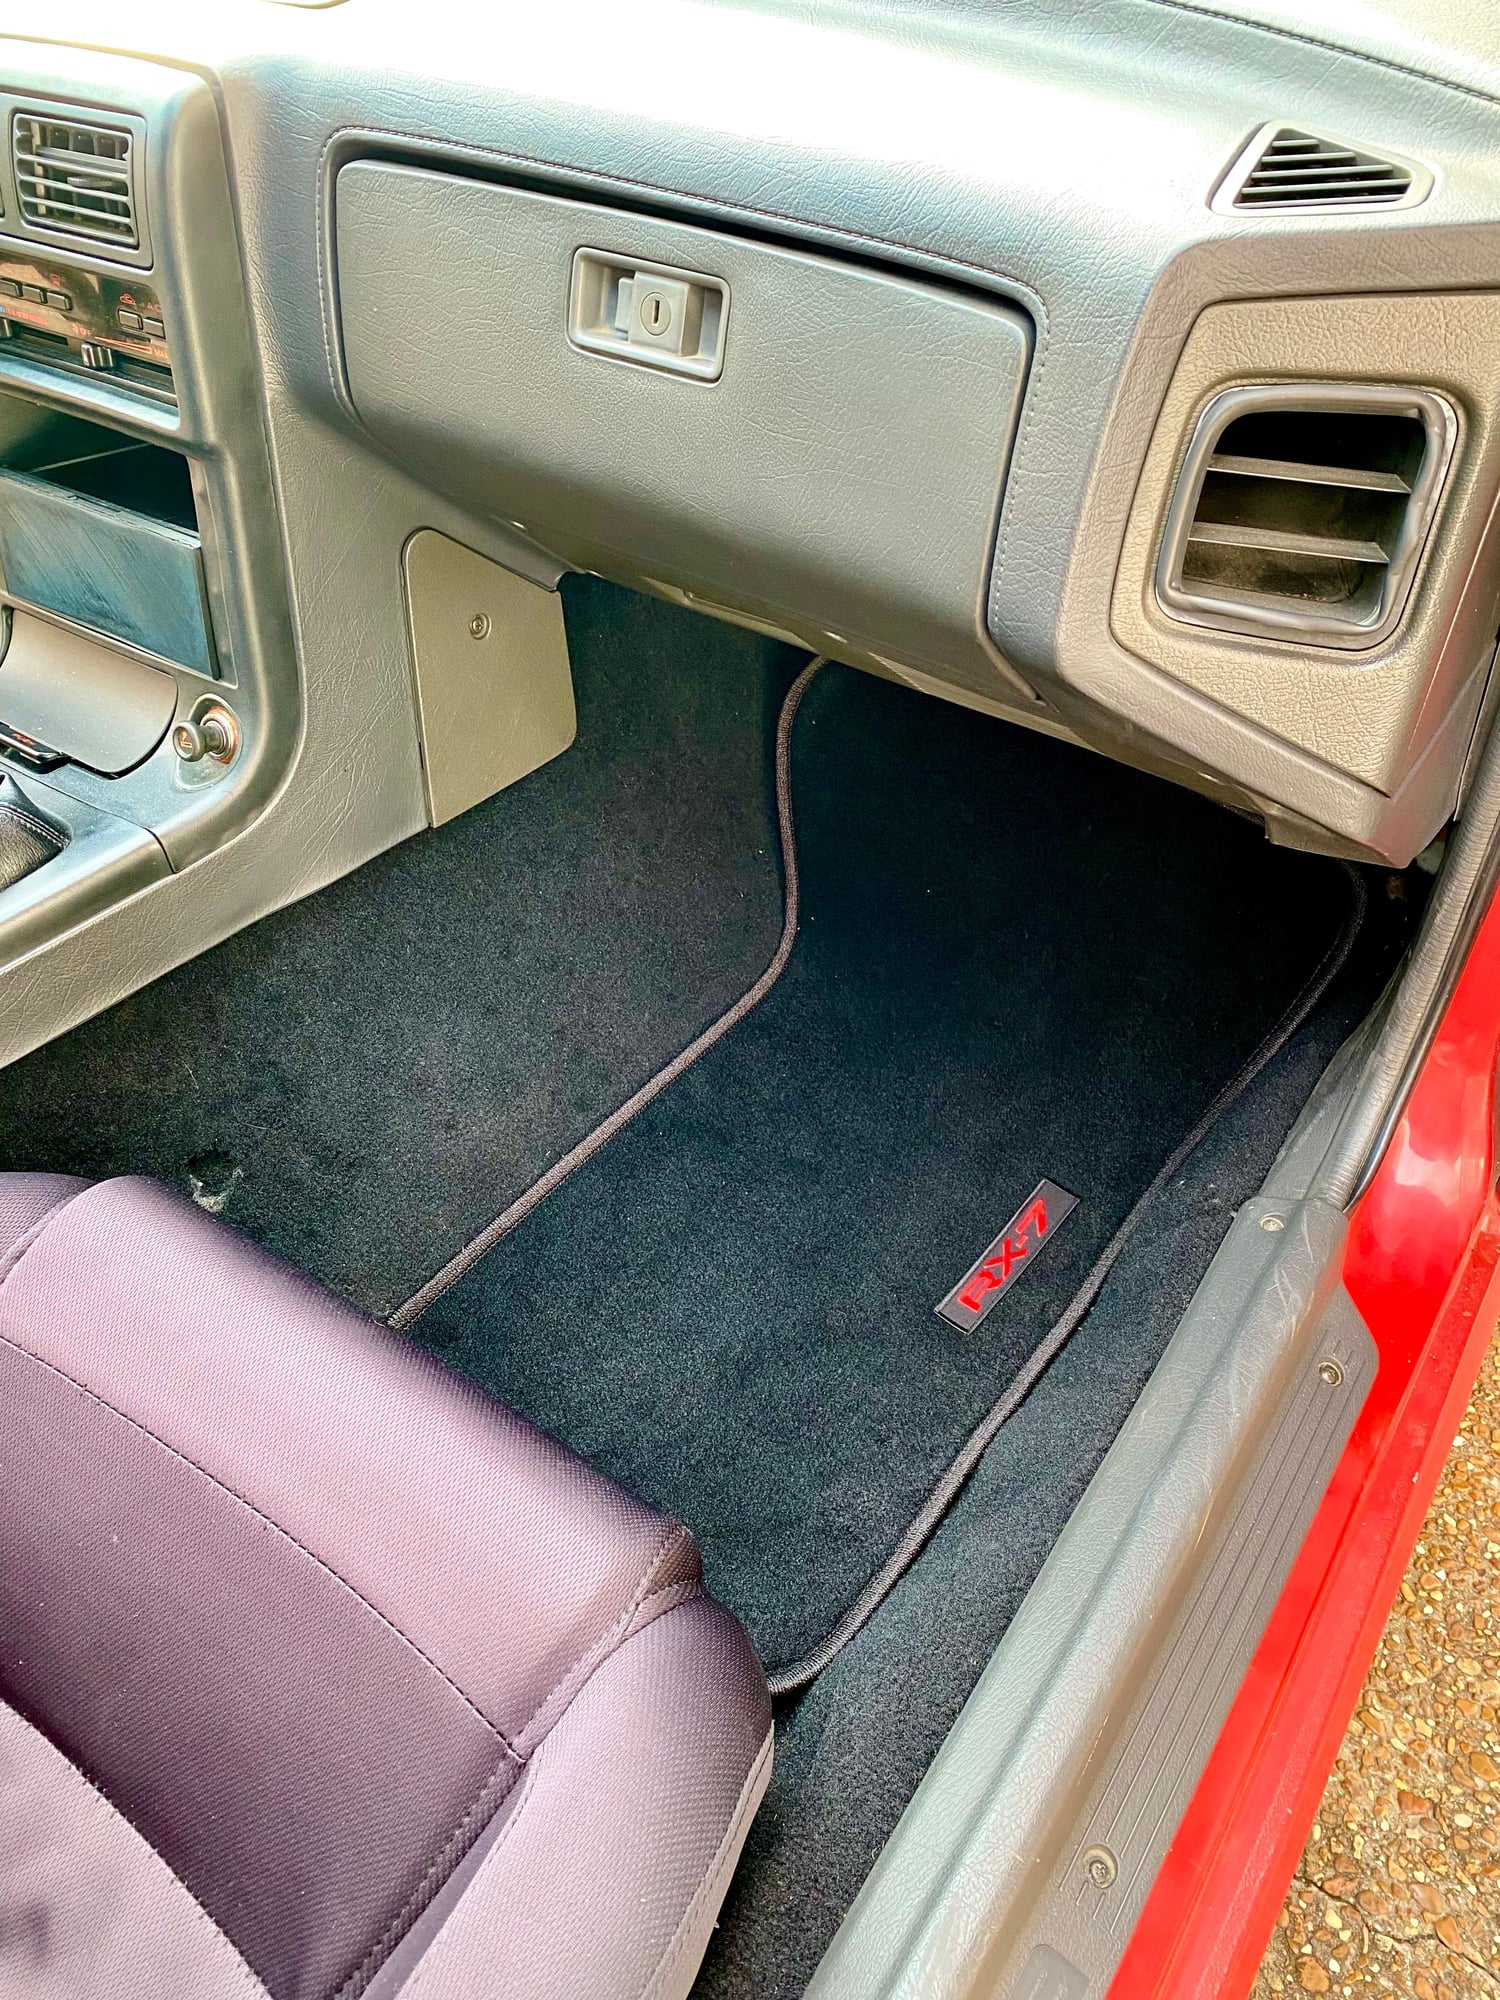 Interior/Upholstery - Nice 2nd gen floor mats - New - 1986 to 1991 Mazda RX-7 - Elkmont, AL 35620, United States